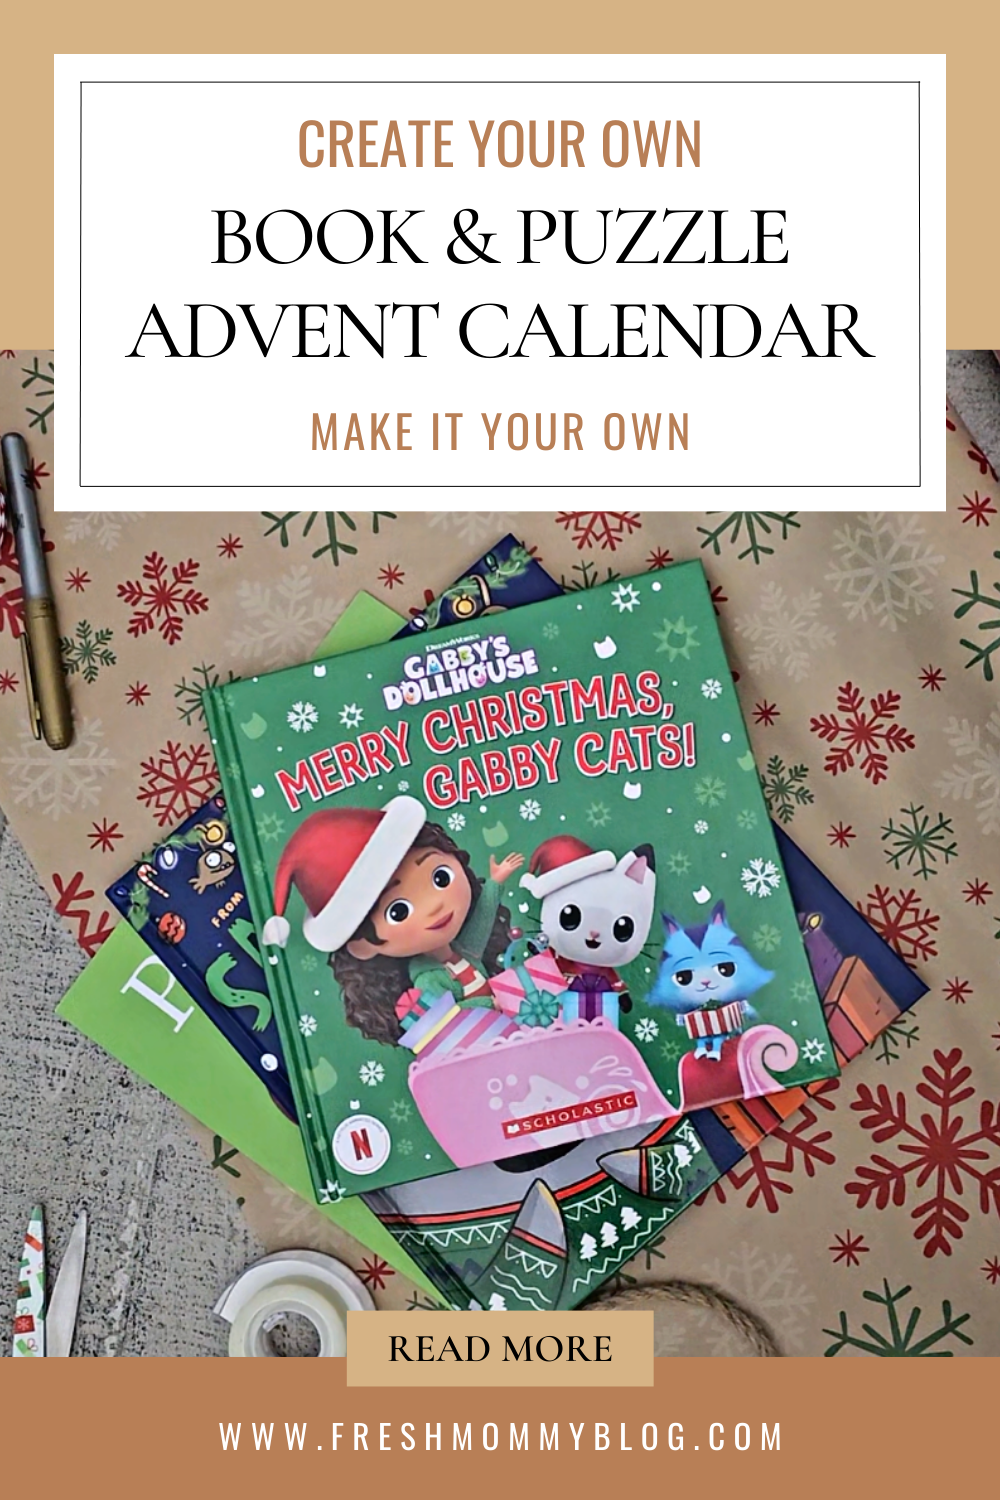 create your own book and puzzle advent calendar. It's perfect because you can customize it to your family.